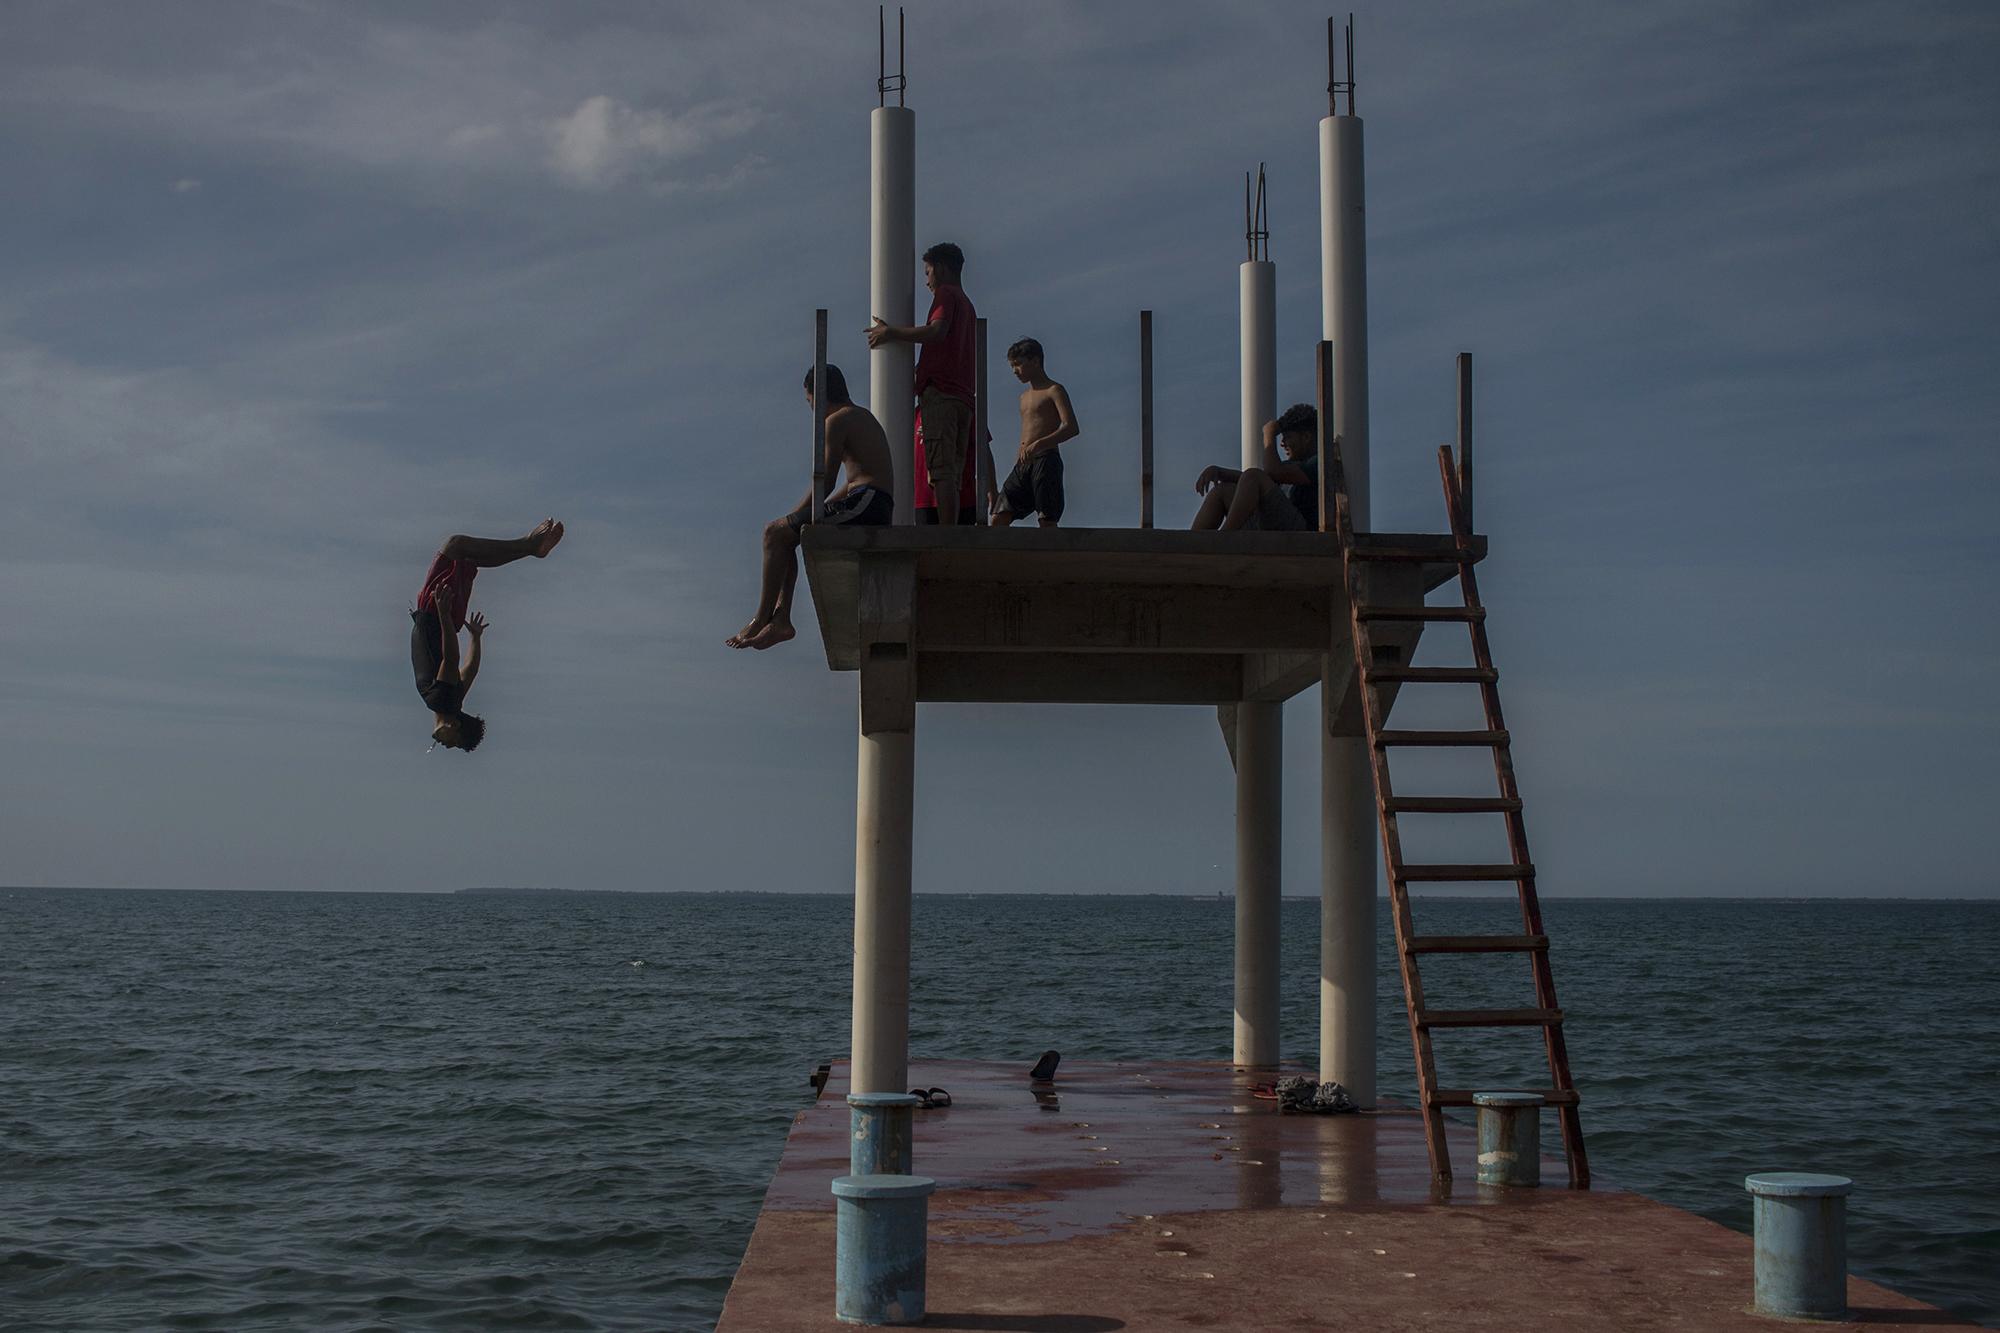 Local children jump from the dock into Trujillo Bay, one of the few distractions for youngsters living nearby. Photo: Víctor Peña/El Faro